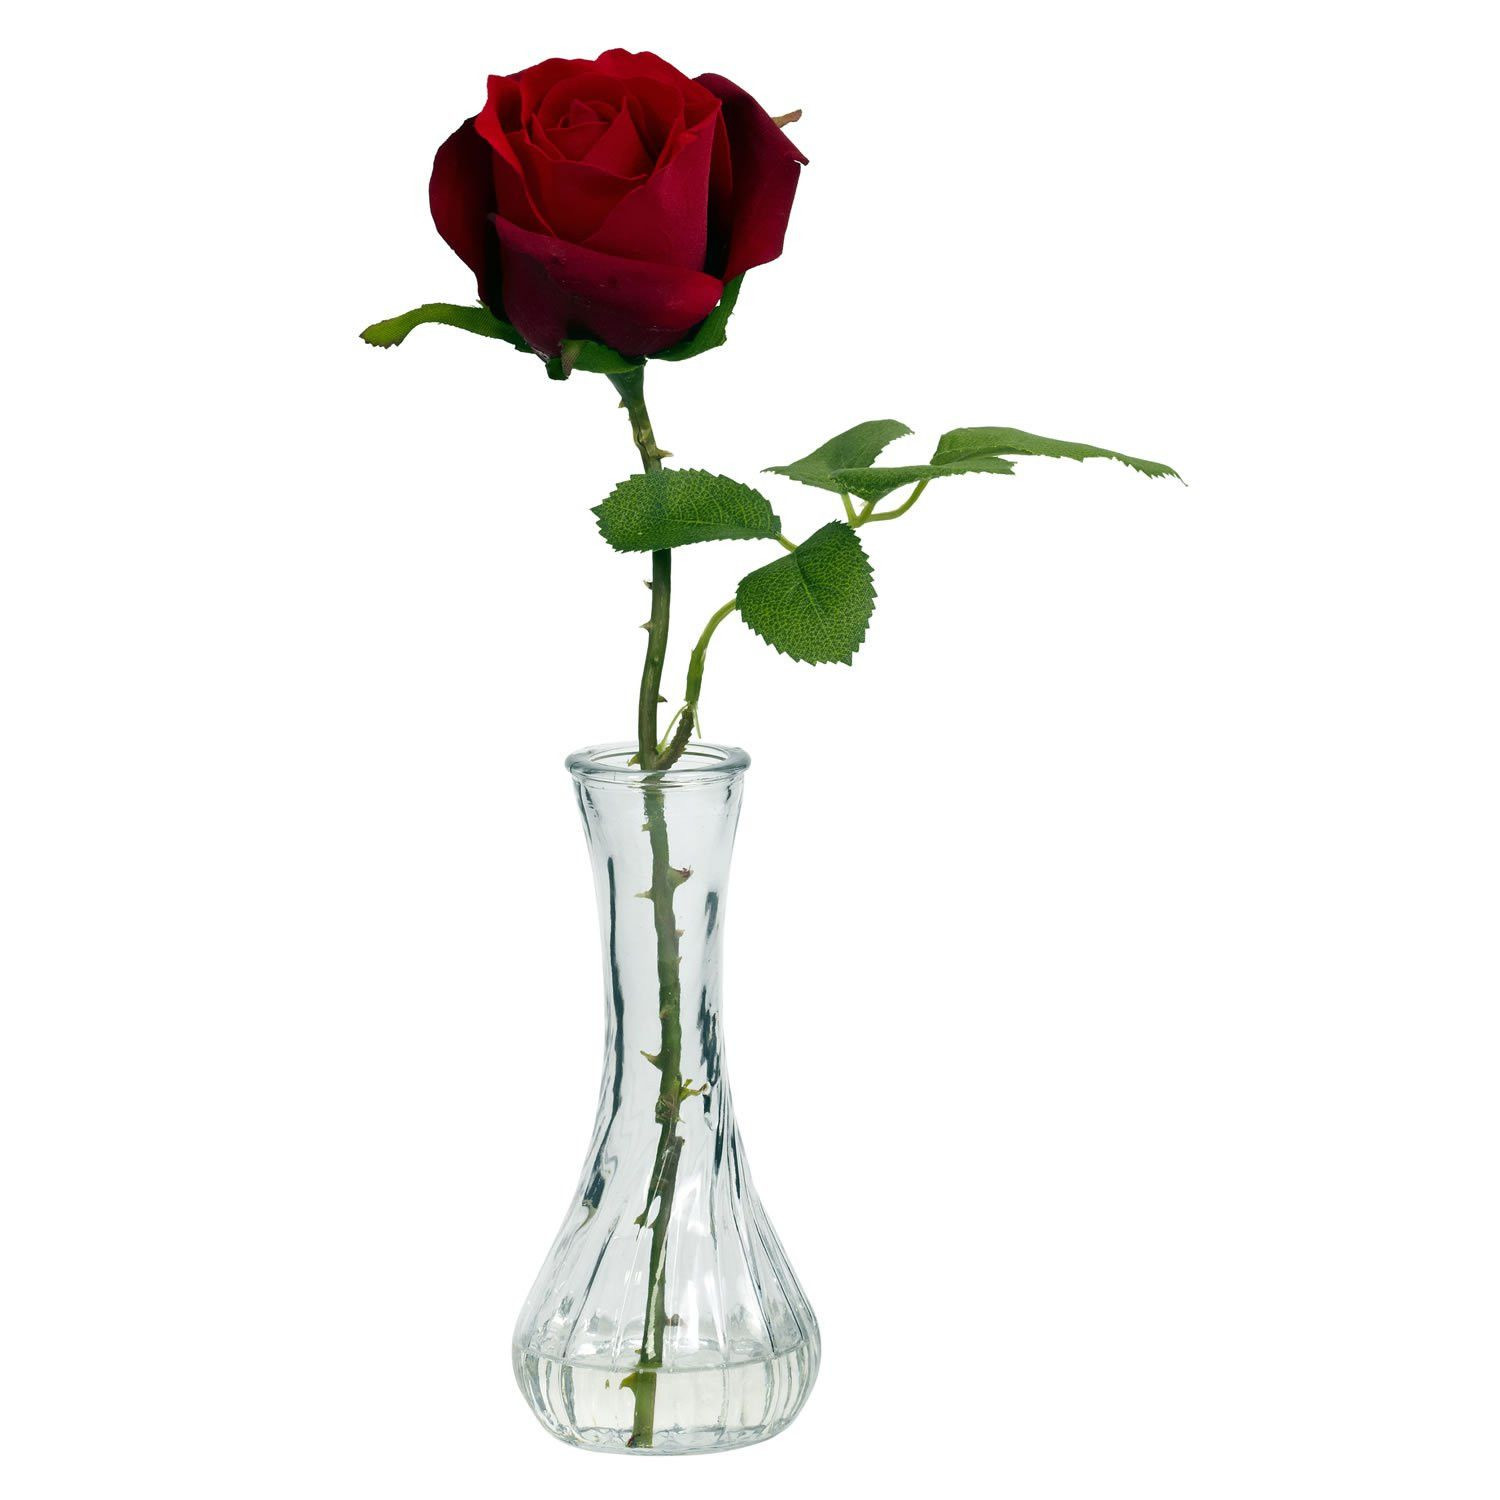 10 Amazing Cut Out Vase 2024 free download cut out vase of pictures of roses in a vase inspirational vase redh vases single regarding pictures of roses in a vase inspirational vase redh vases single rose in vasei 0d a